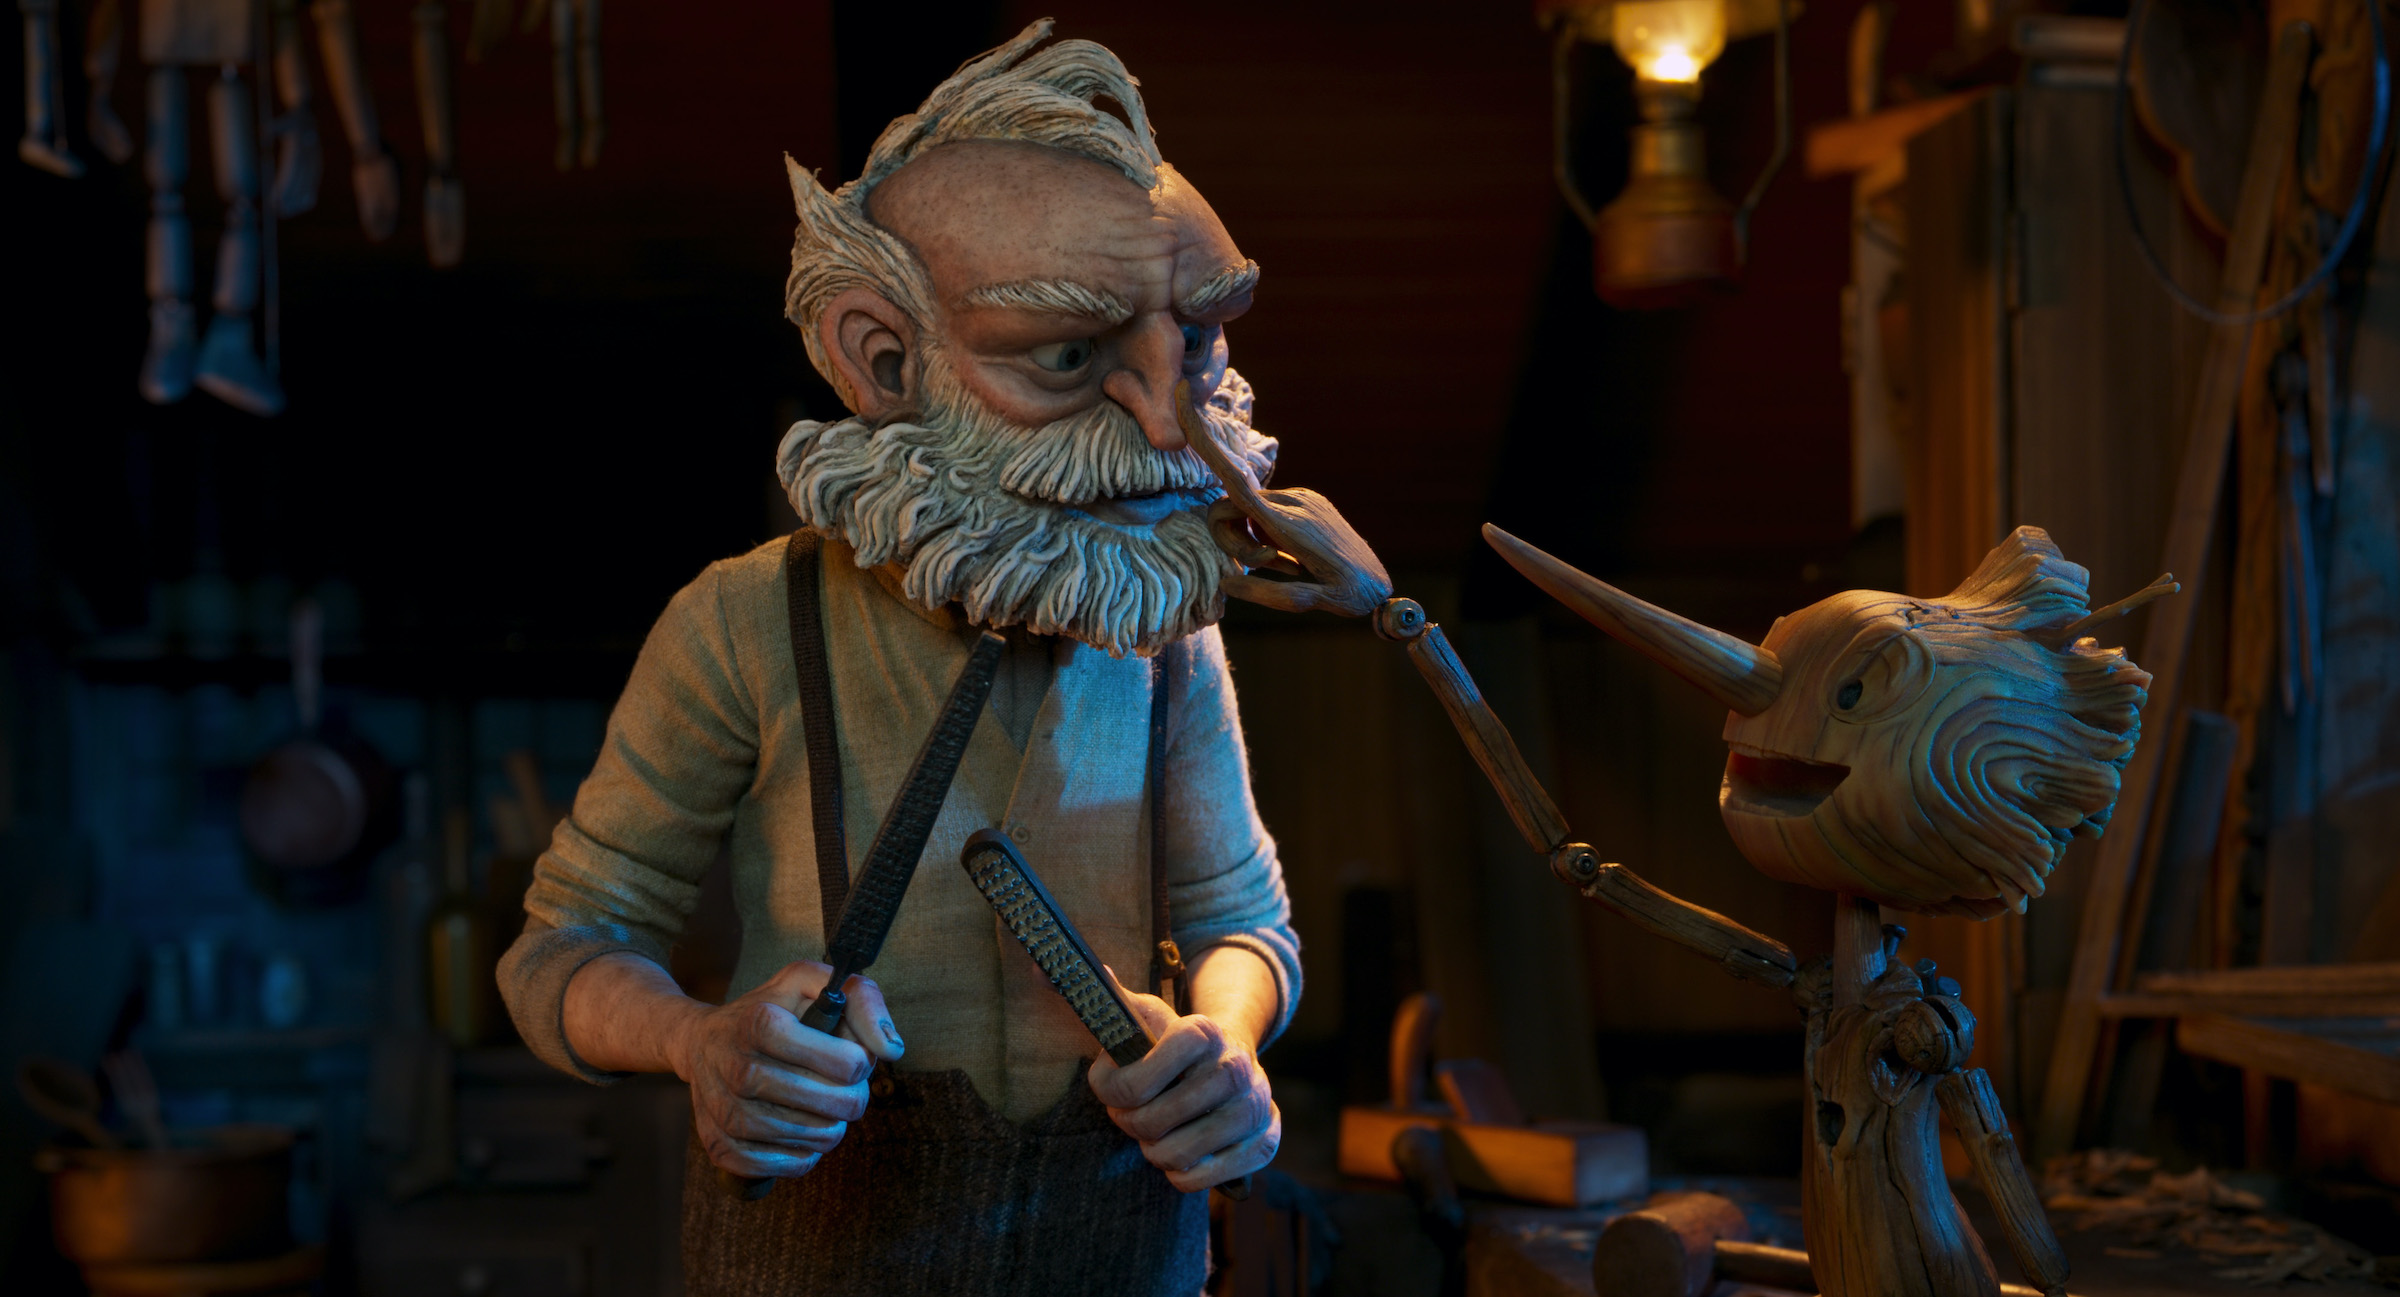 Gepetto (voiced by David Bradley) and Pinocchio (voiced by Gregory Mann) in Guillermo del Toro's Pinocchio (Courtesy of Netflix)